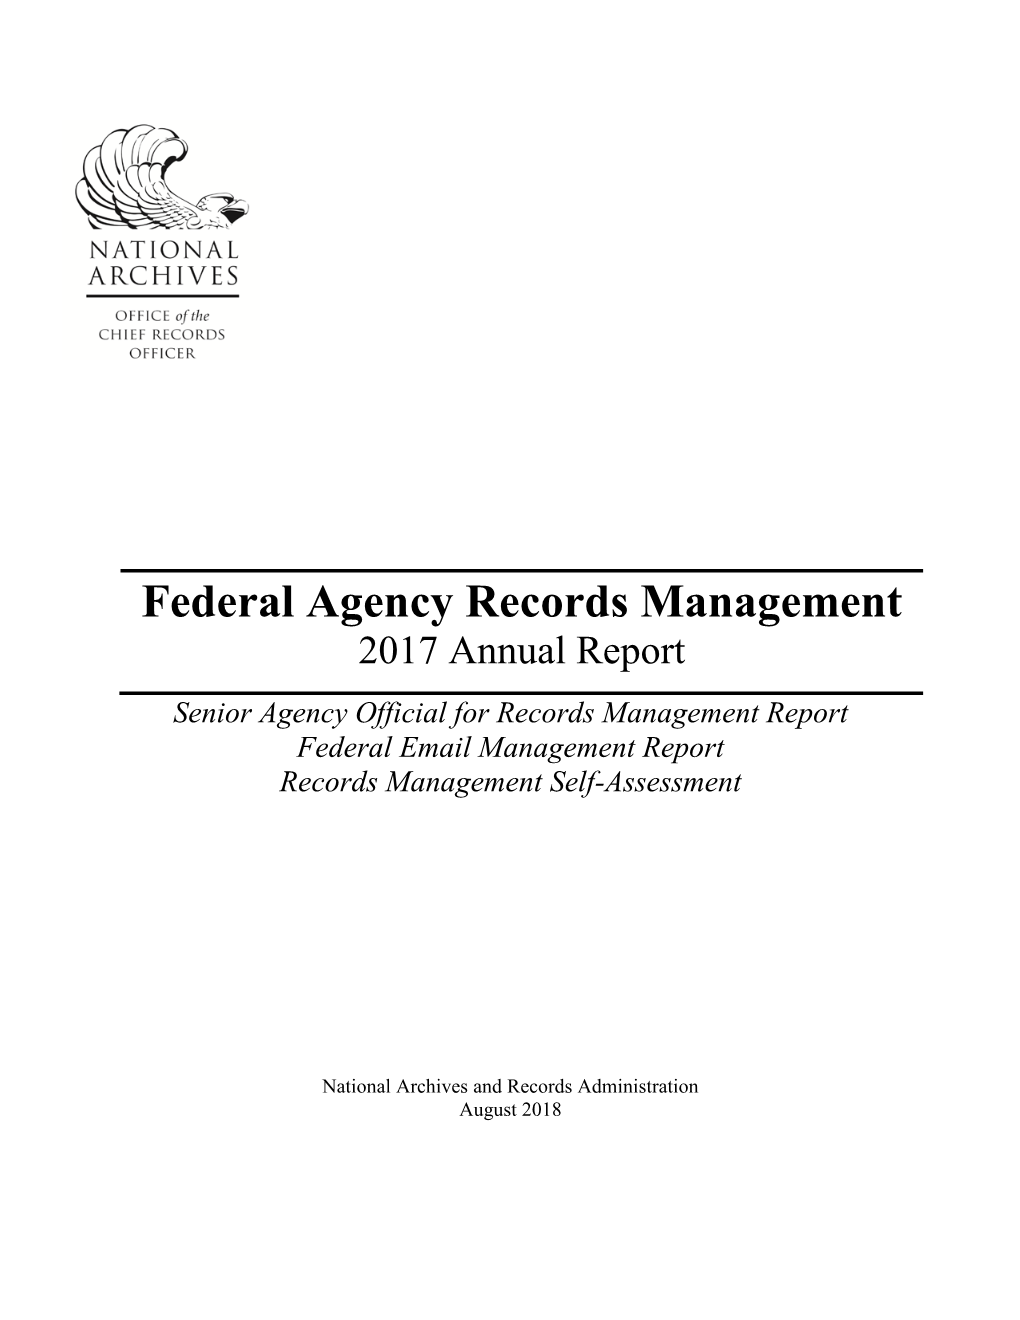 Federal Agency Records Management Annual Report 2017